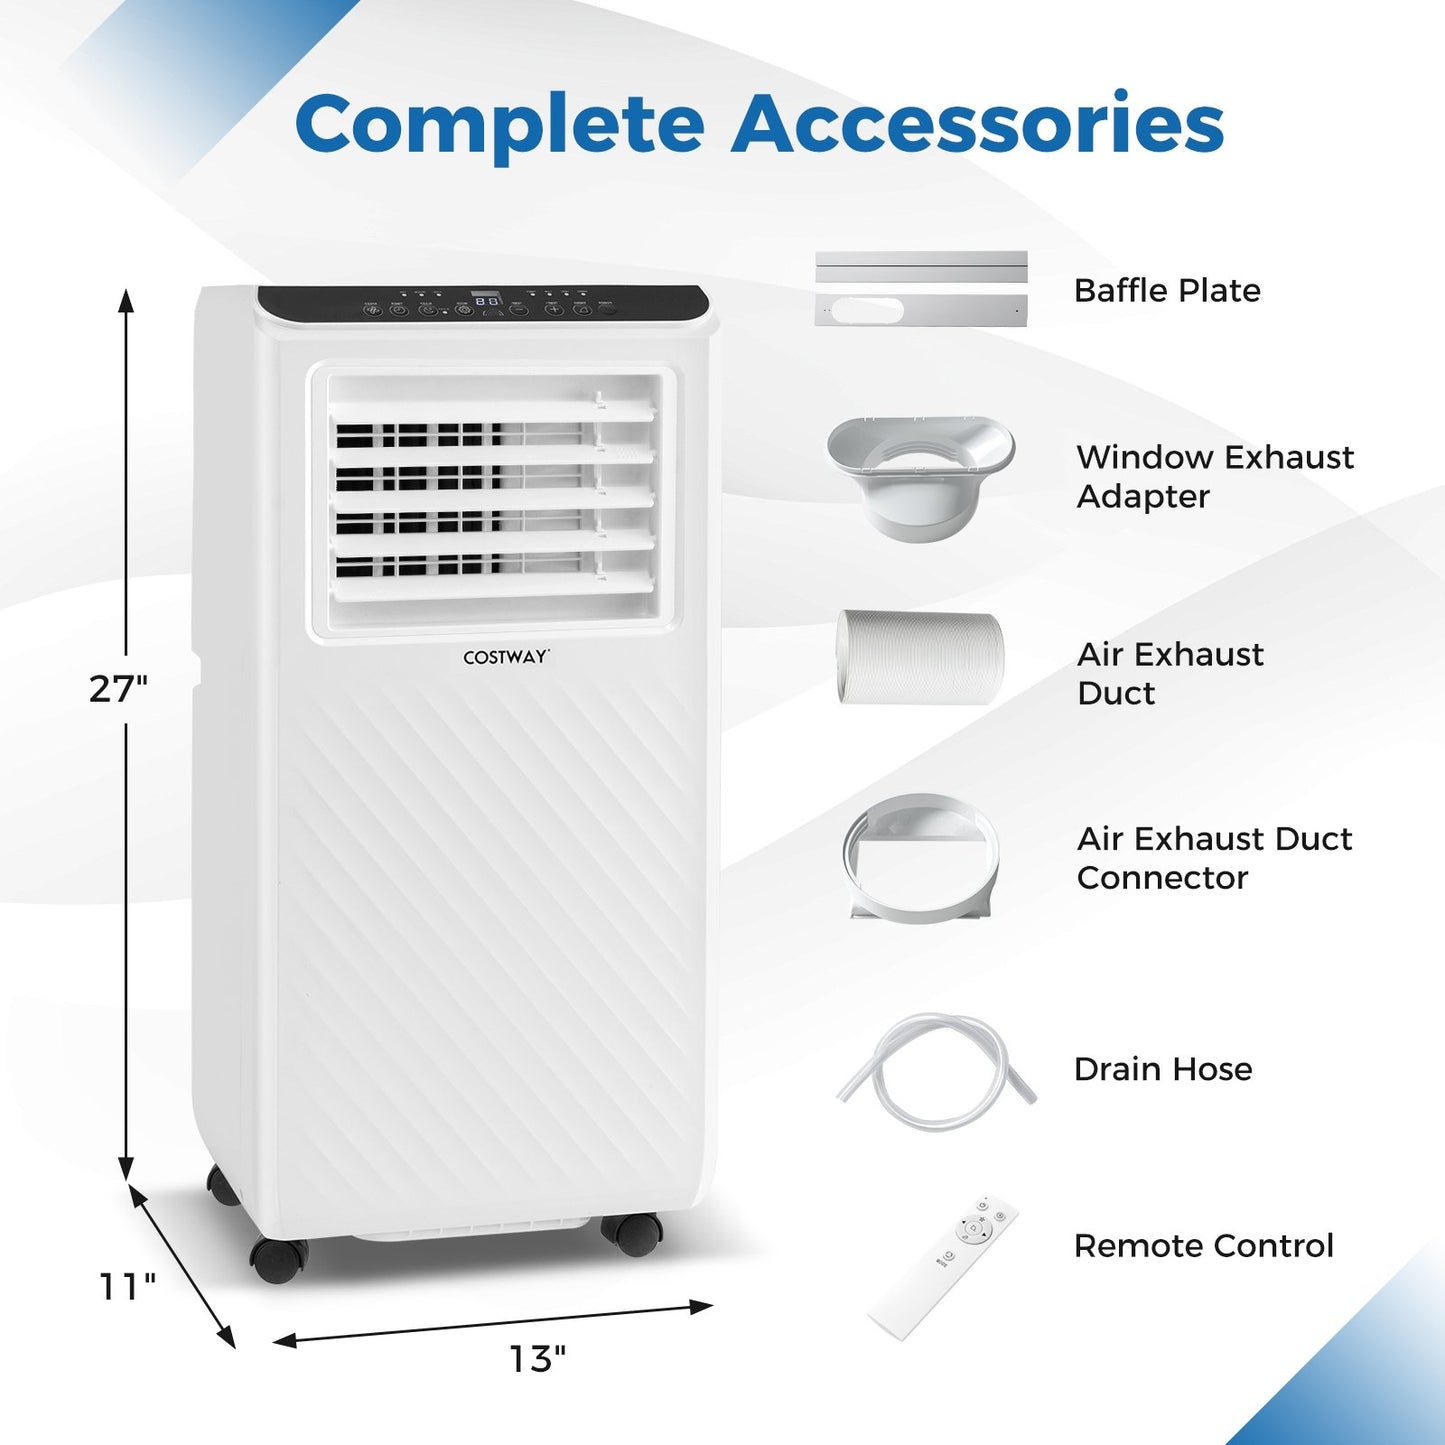 8000 BTU Portable Air Conditioner 3 in 1 Floor AC Unit with Fan and Dehumidifier, White